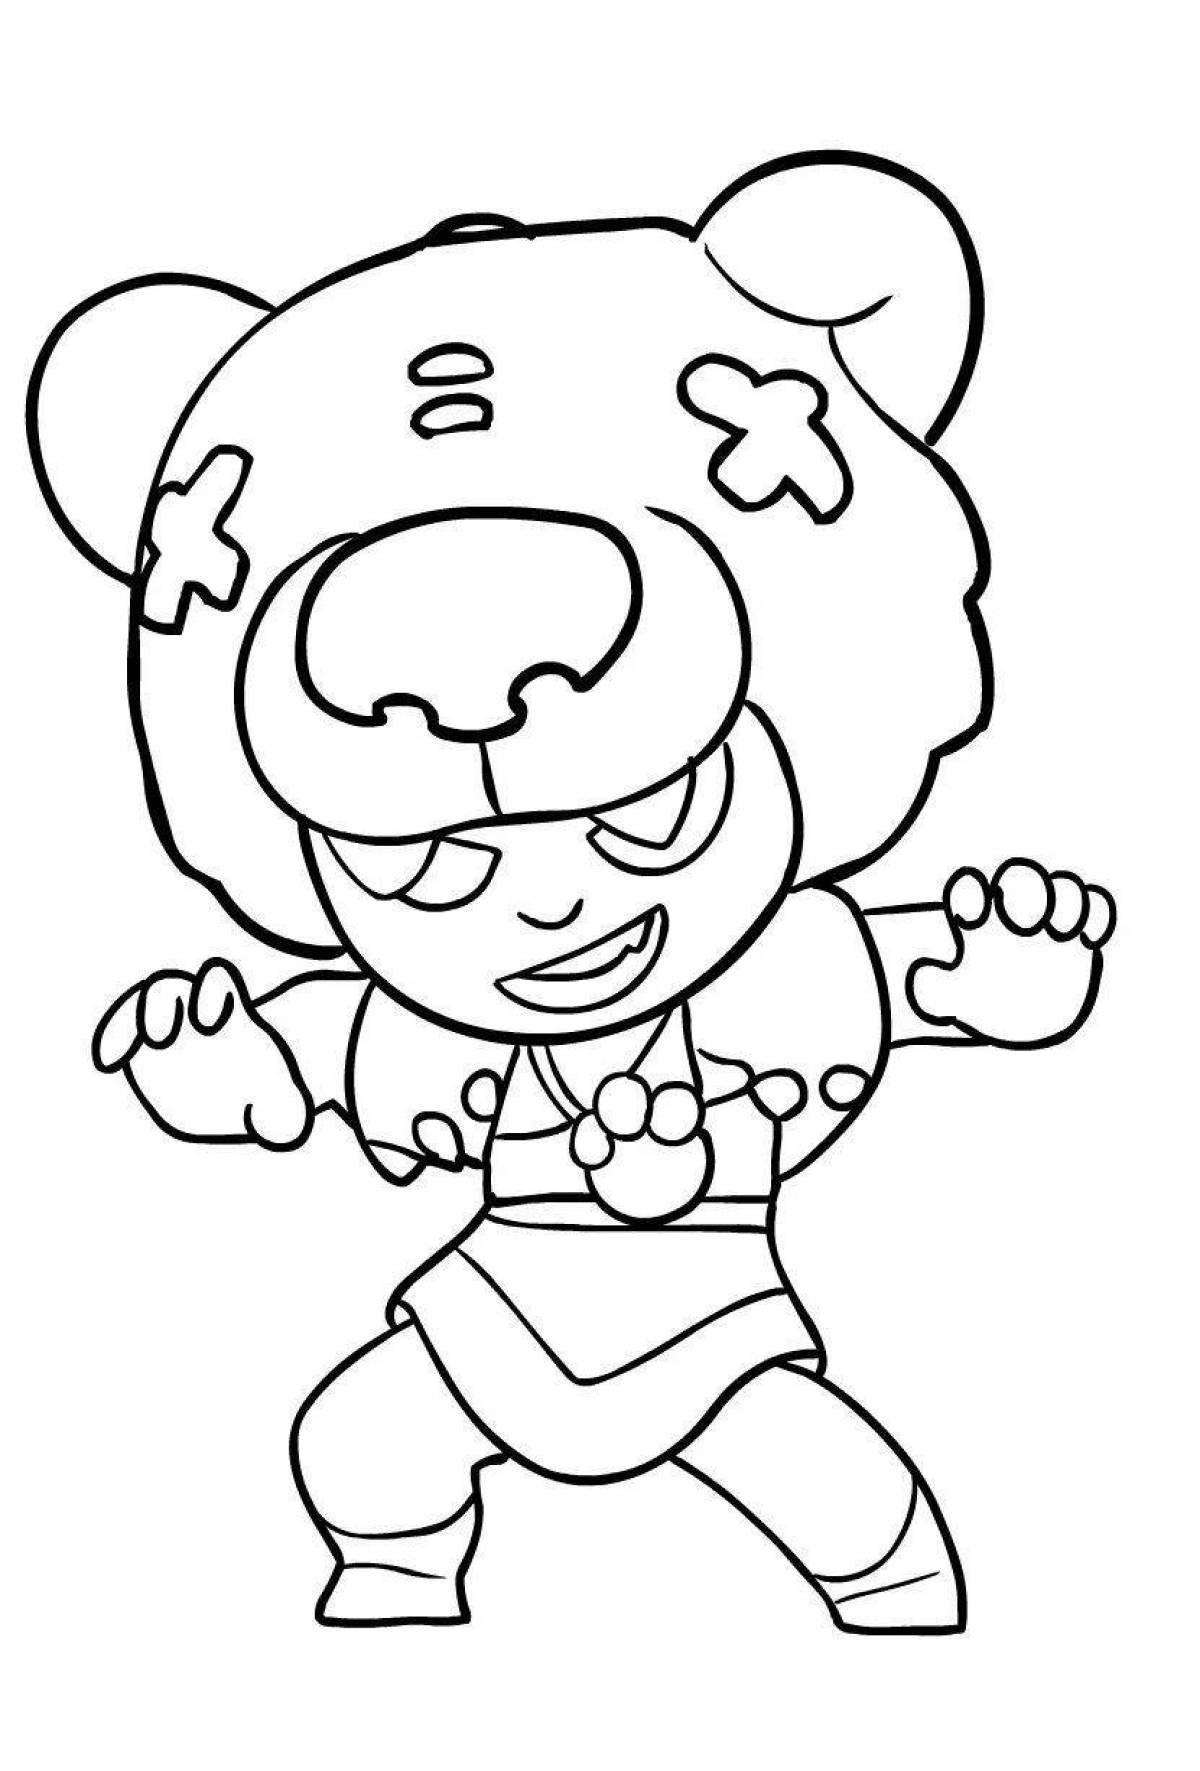 Adorable brawl stars coloring pages